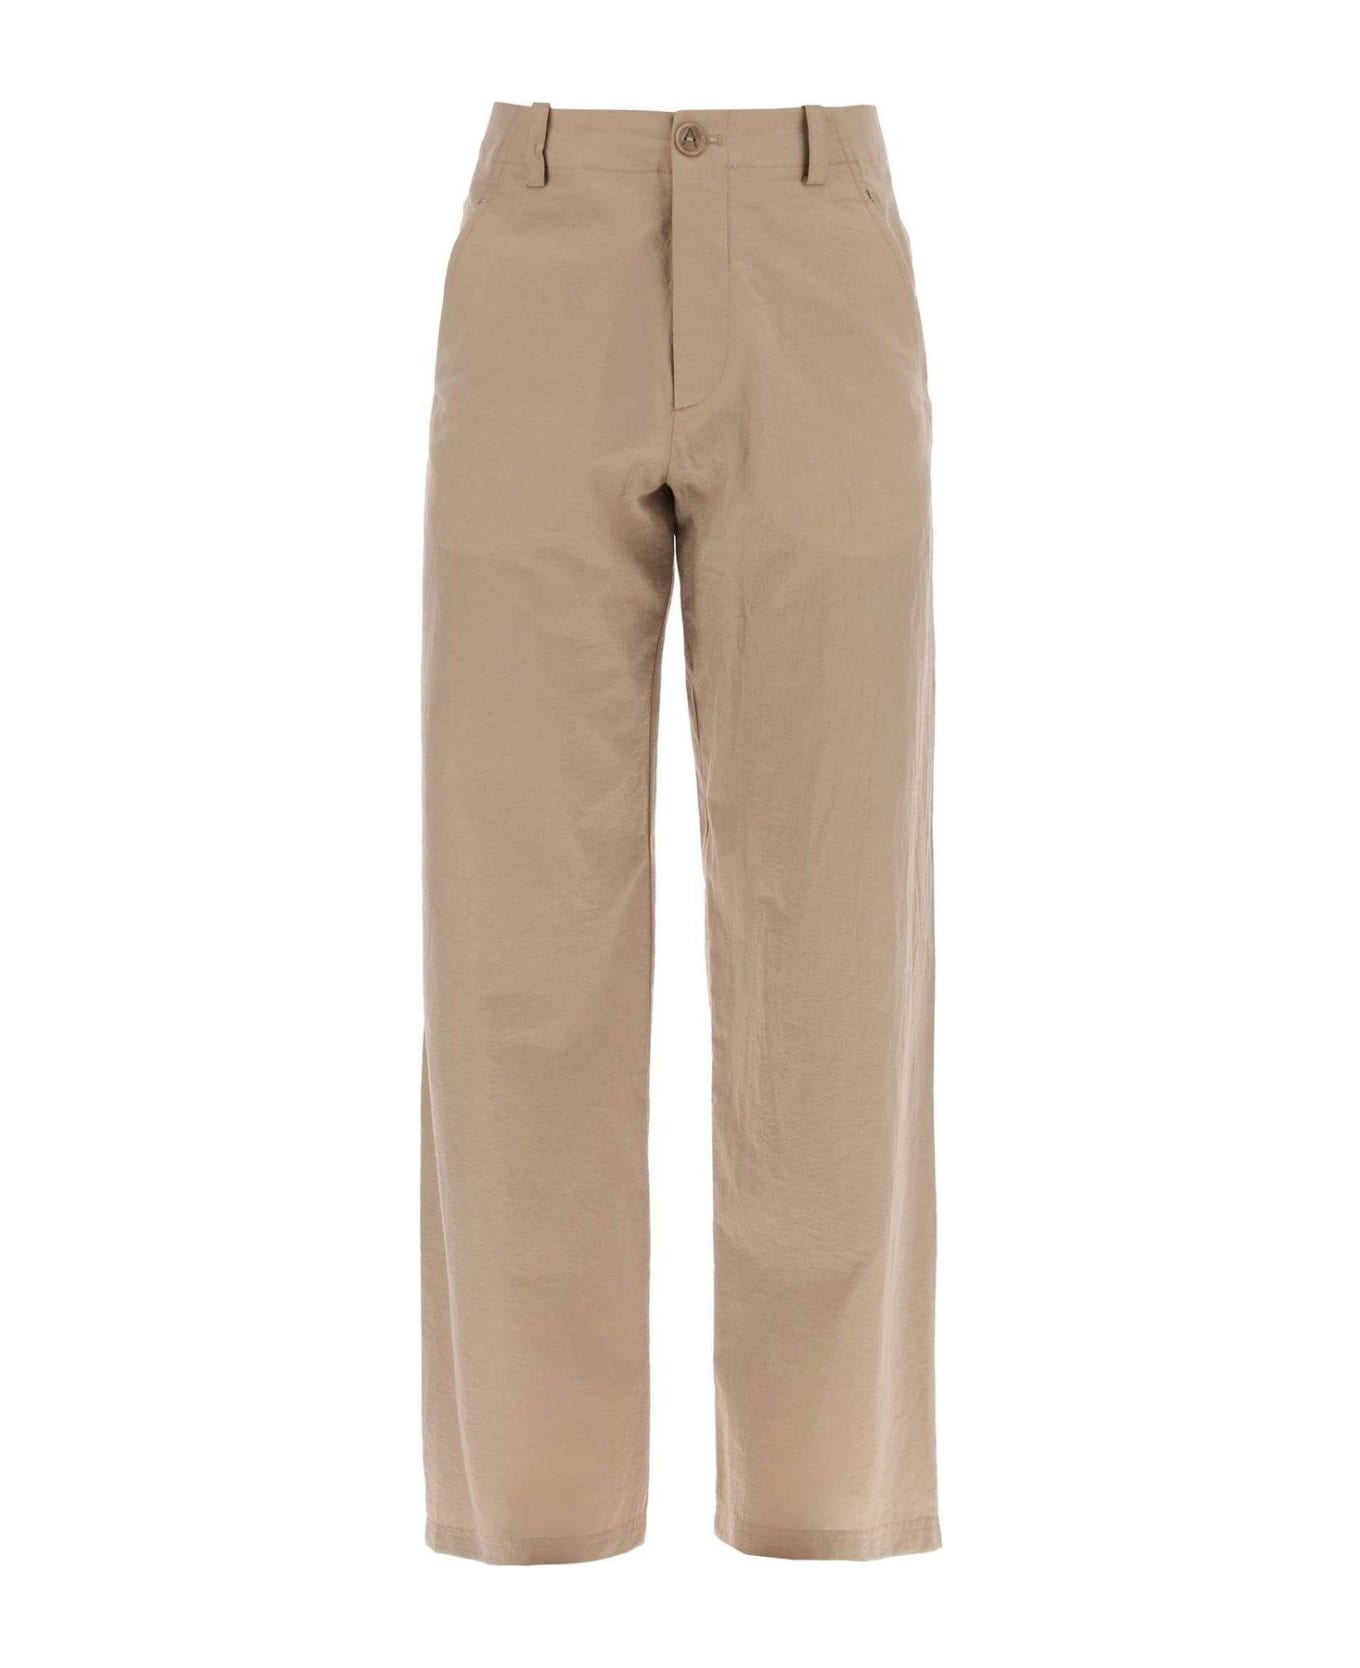 A.P.C. Creased Straight-leg Trousers Pants - MARRONE